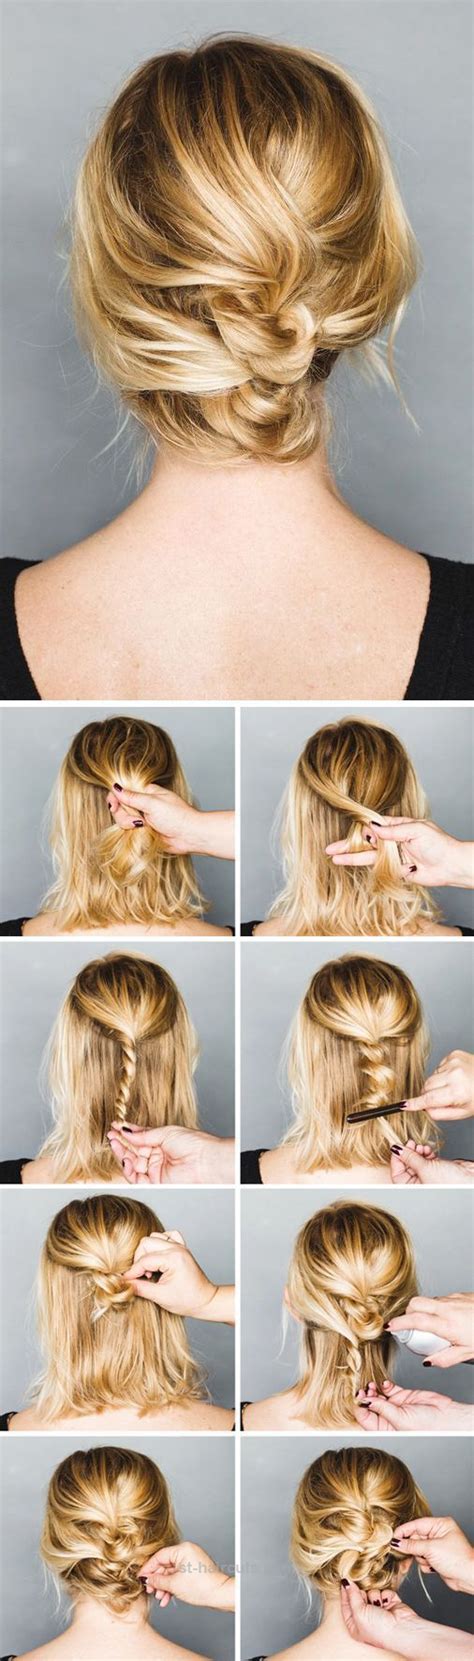 The Easy Updos For Short Hair To Do Yourself Step By Step For Hair Ideas